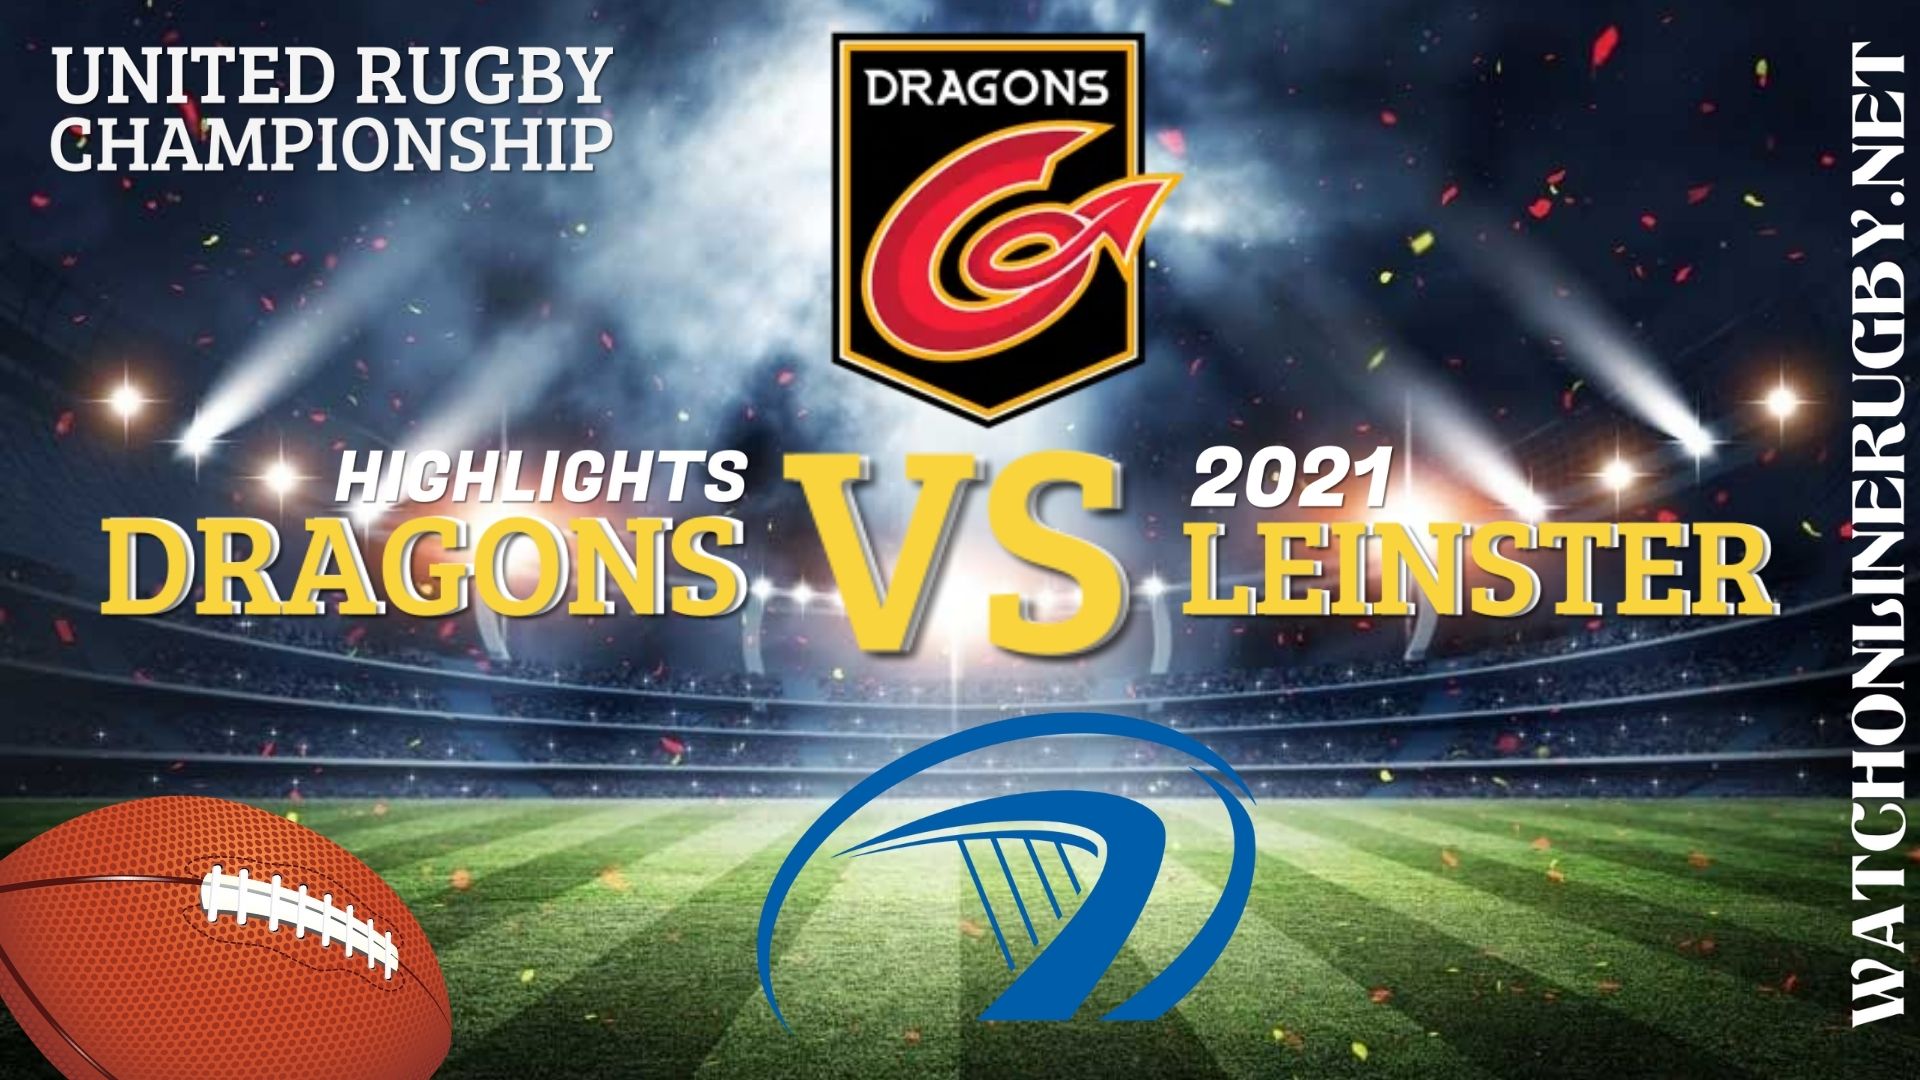 Dragons Vs Leinster United Rugby Championship 2021 RD 2